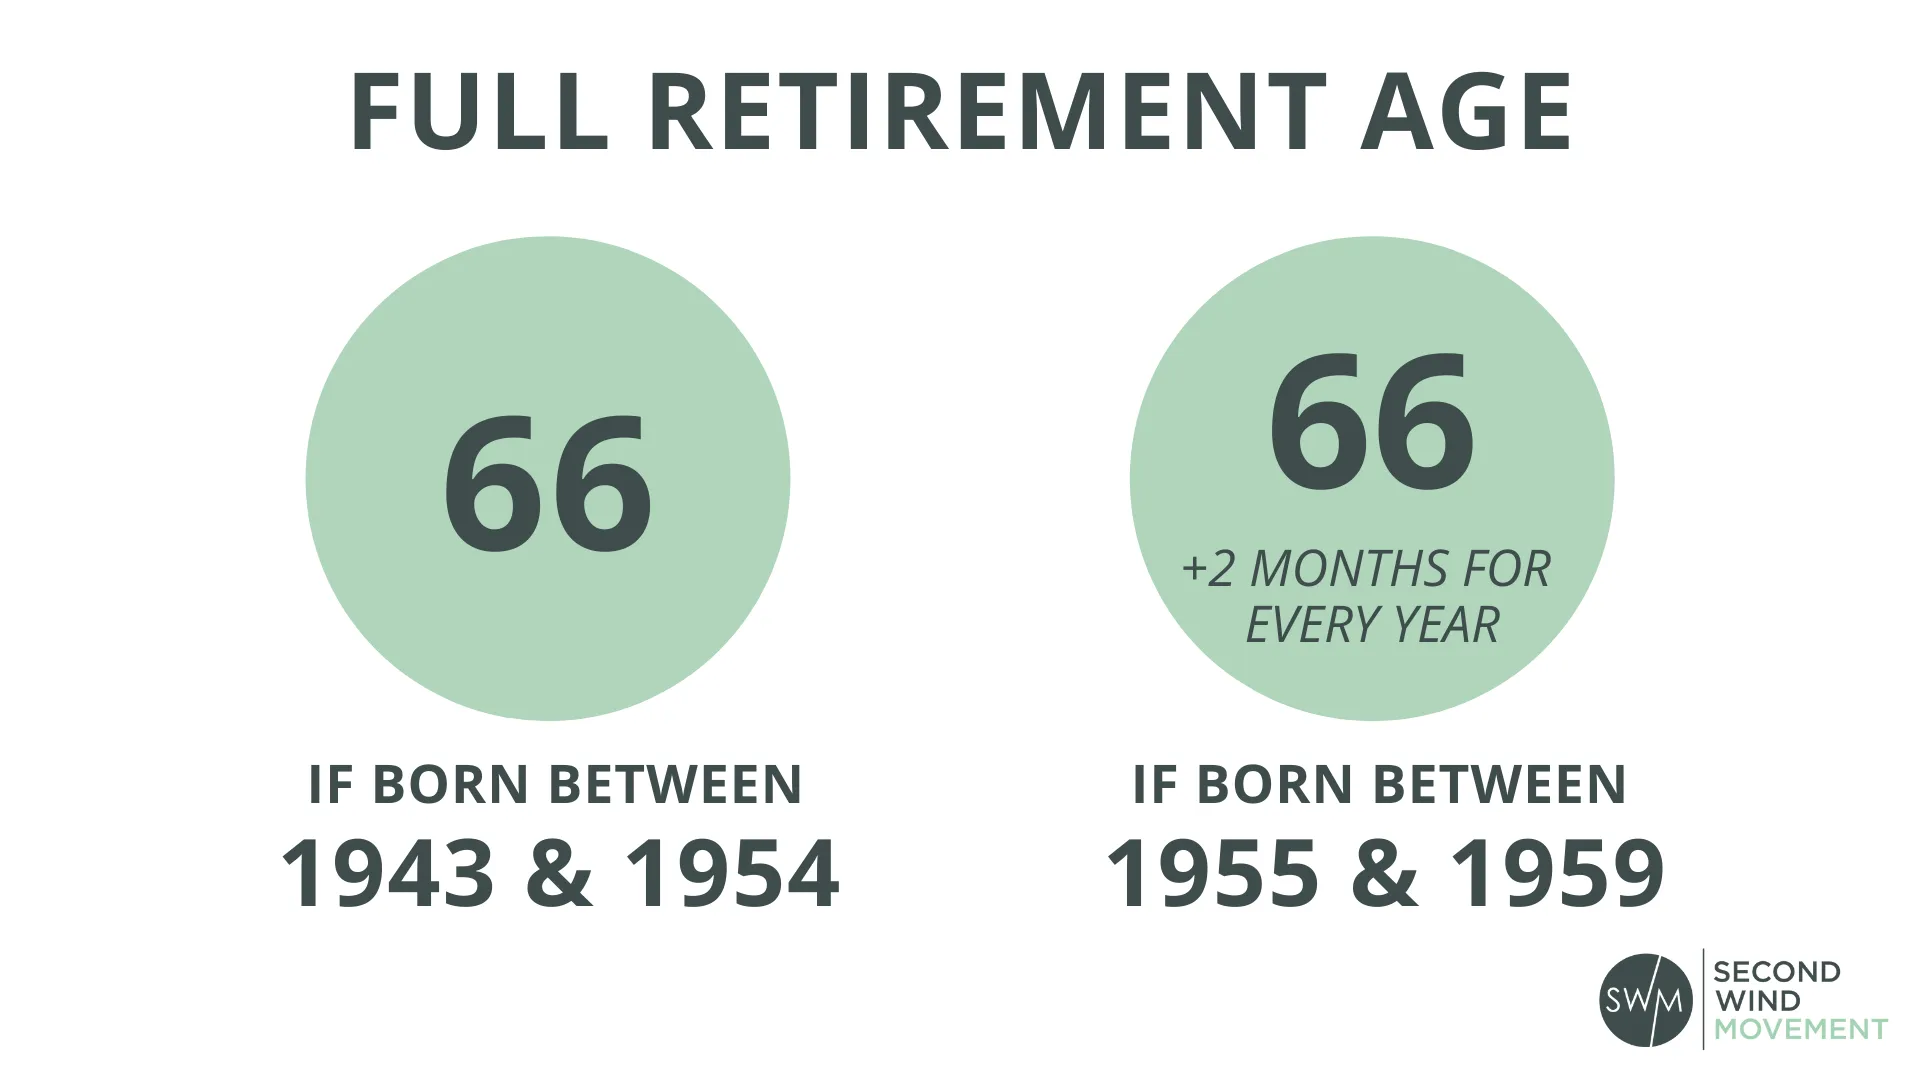 the full retirement age for collecting social security benefits